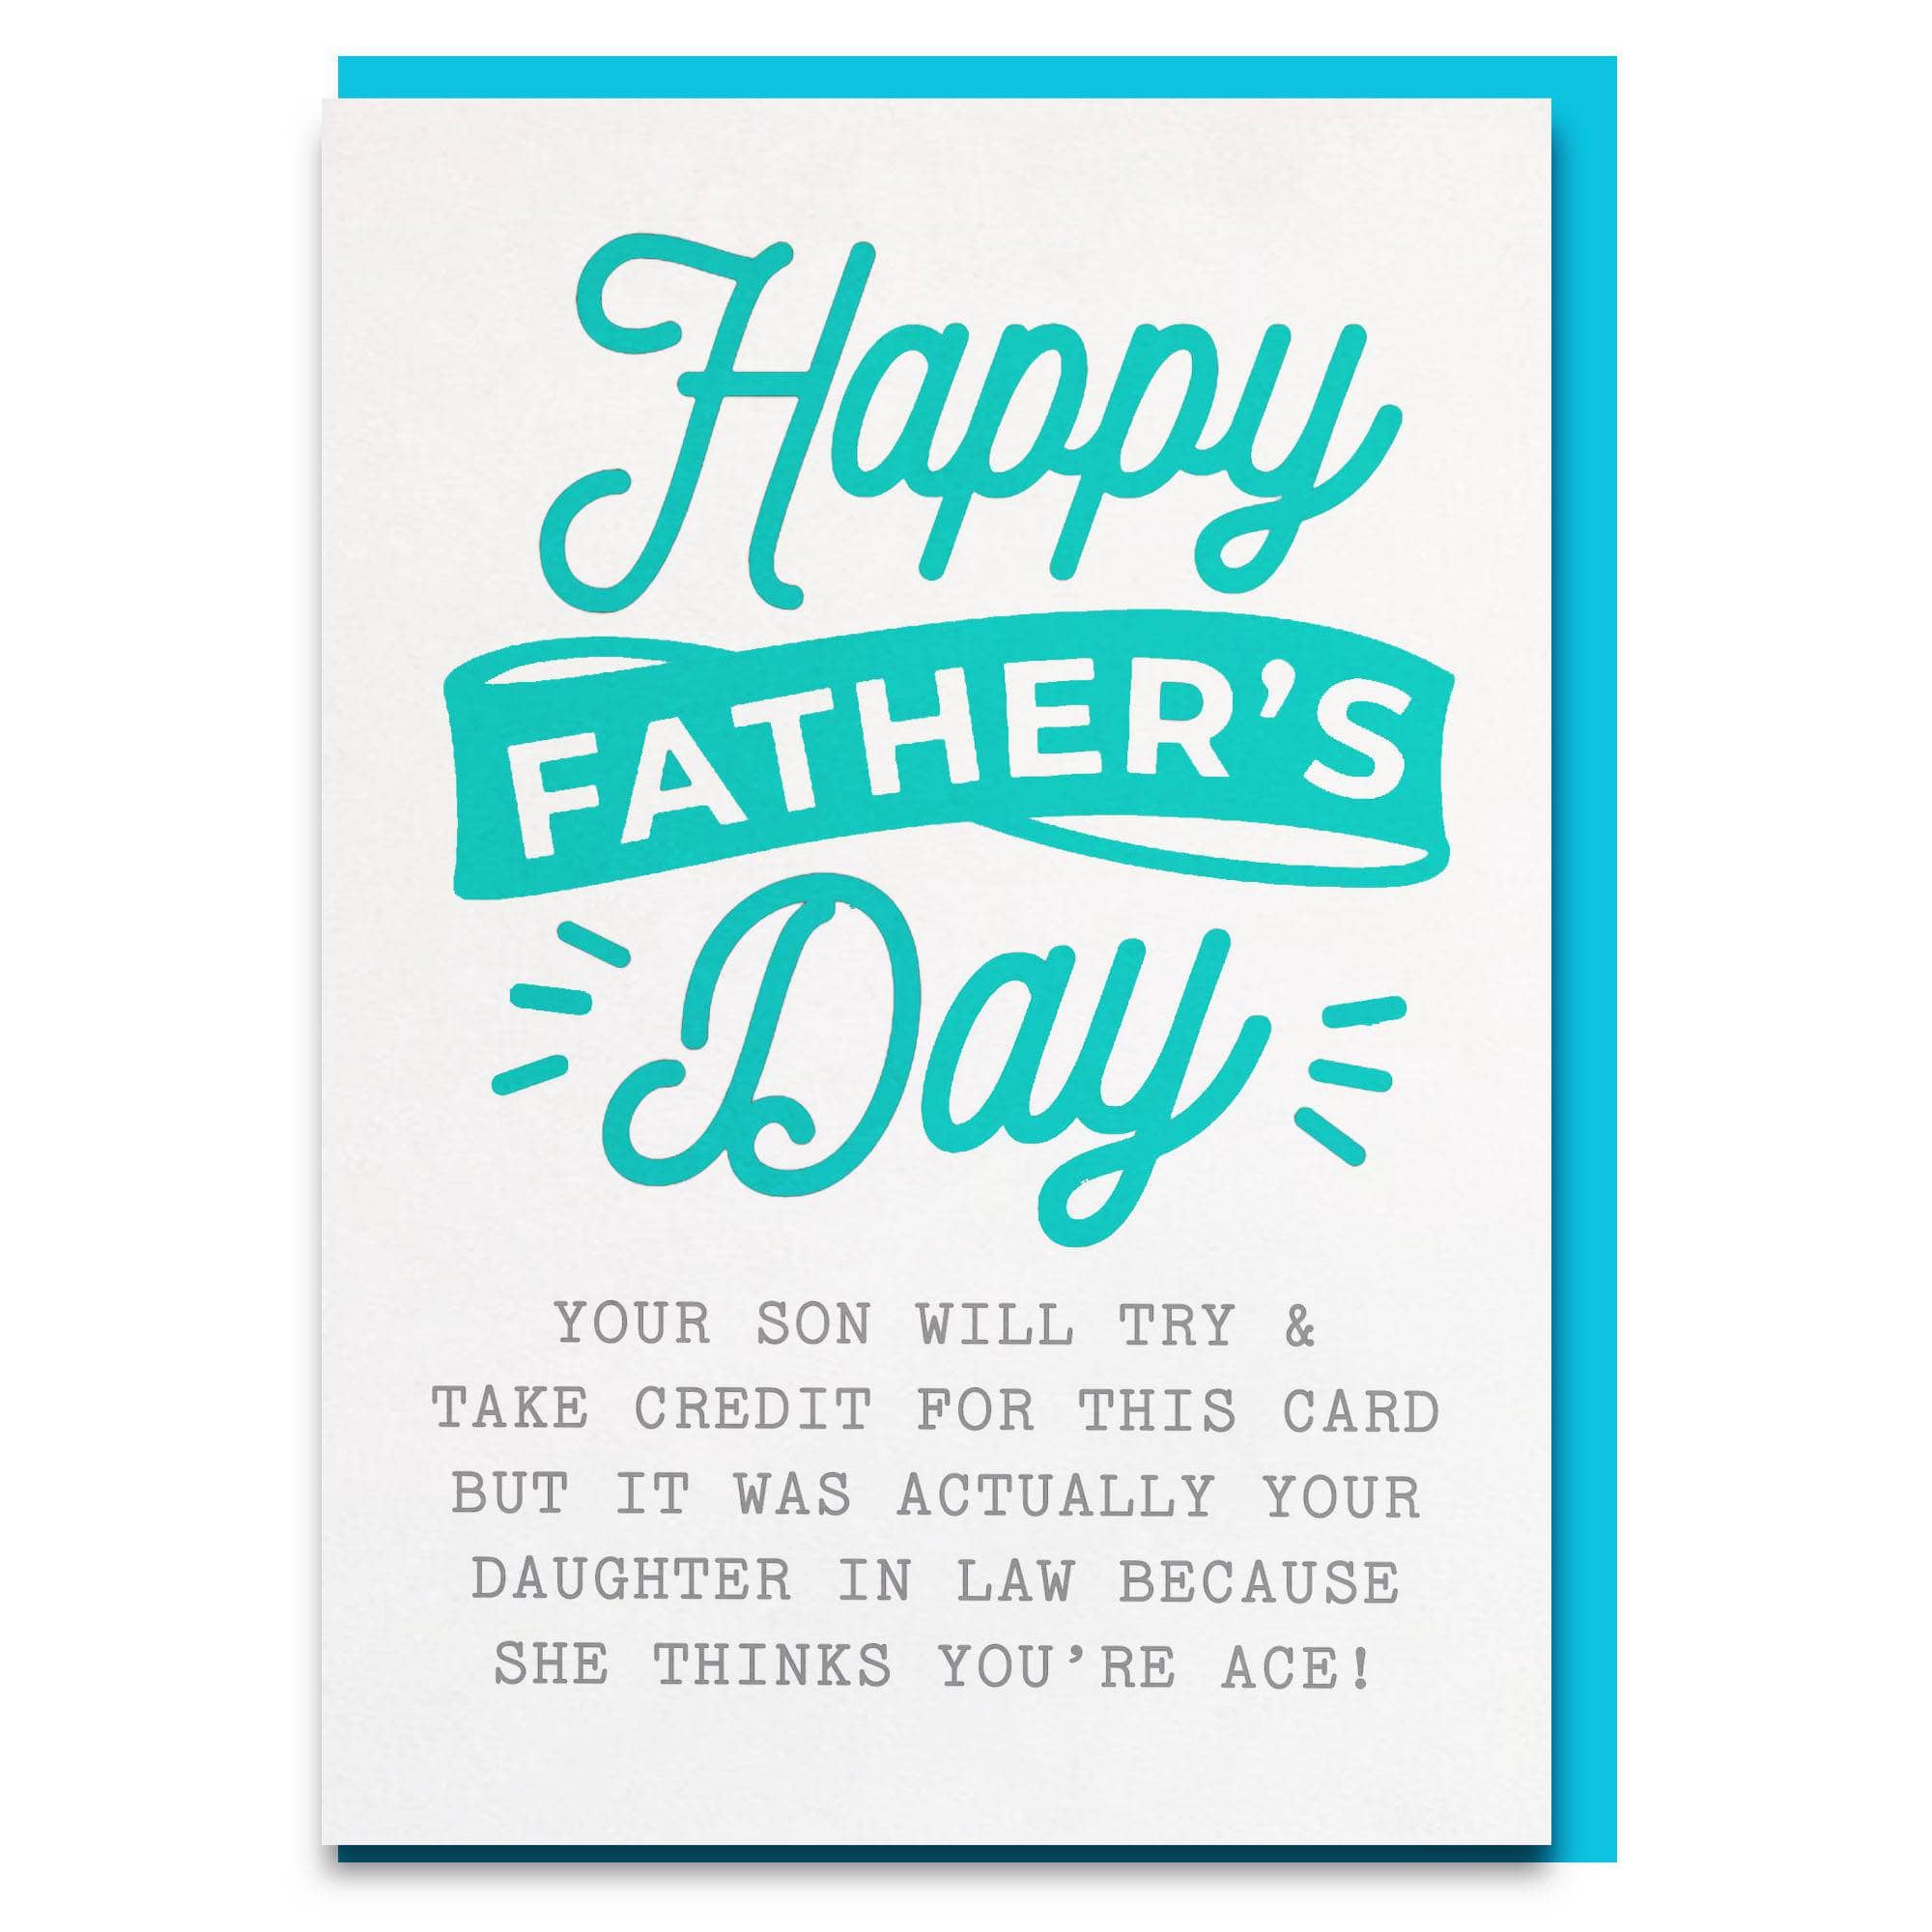 Funny your son will try and take credit for this card but it was actually your daughter in law because she thinks your ace father's day card